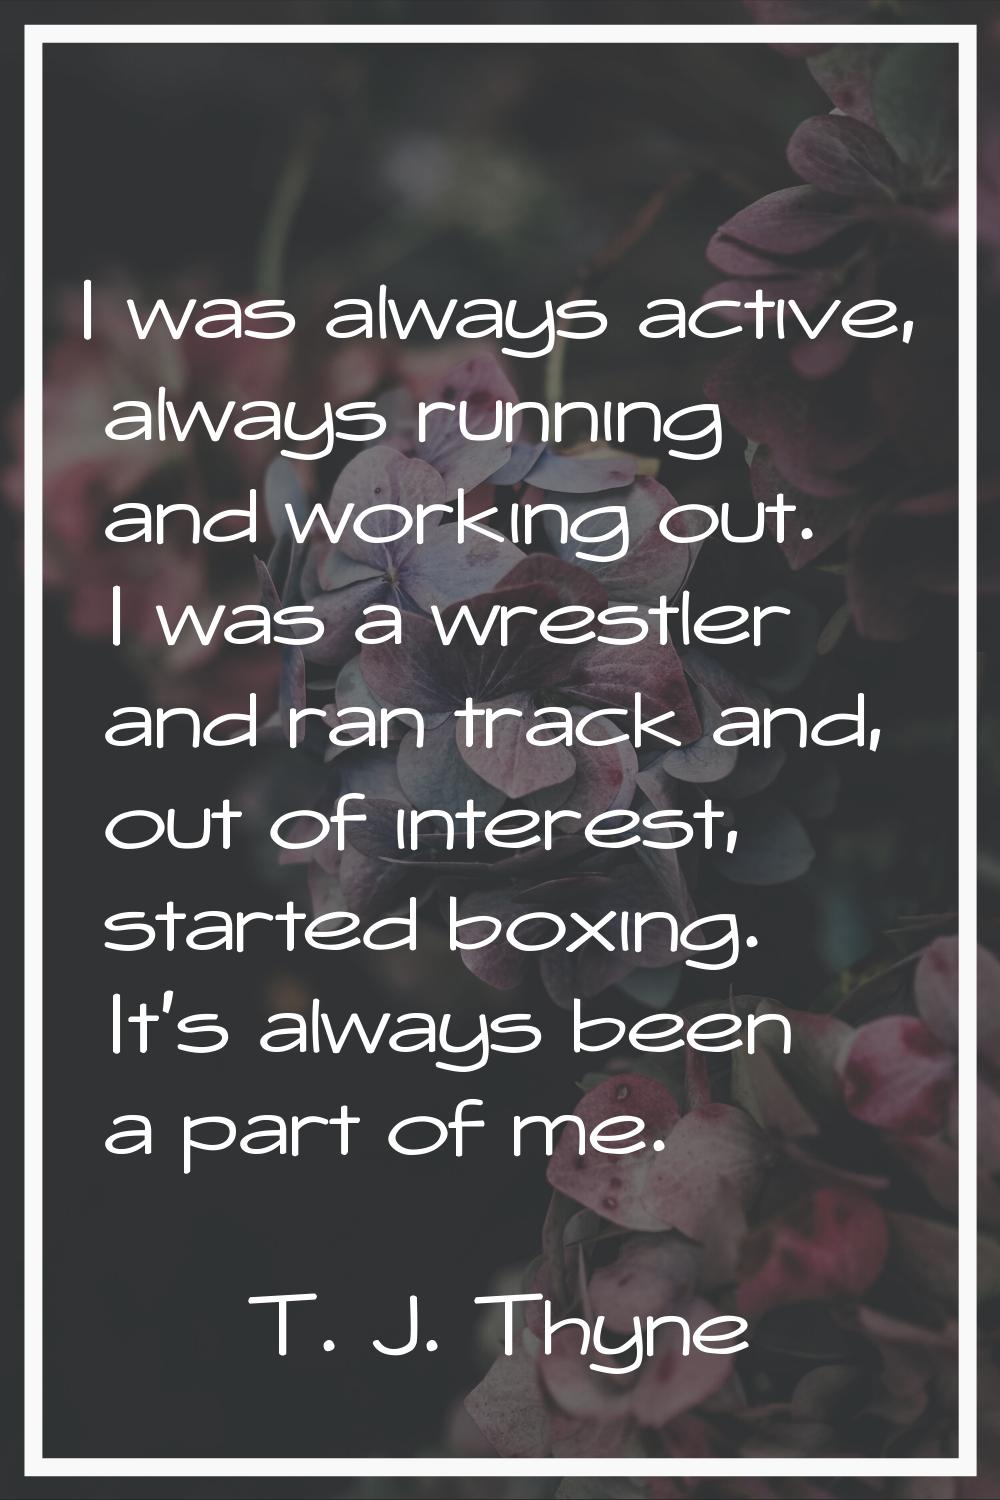 I was always active, always running and working out. I was a wrestler and ran track and, out of int